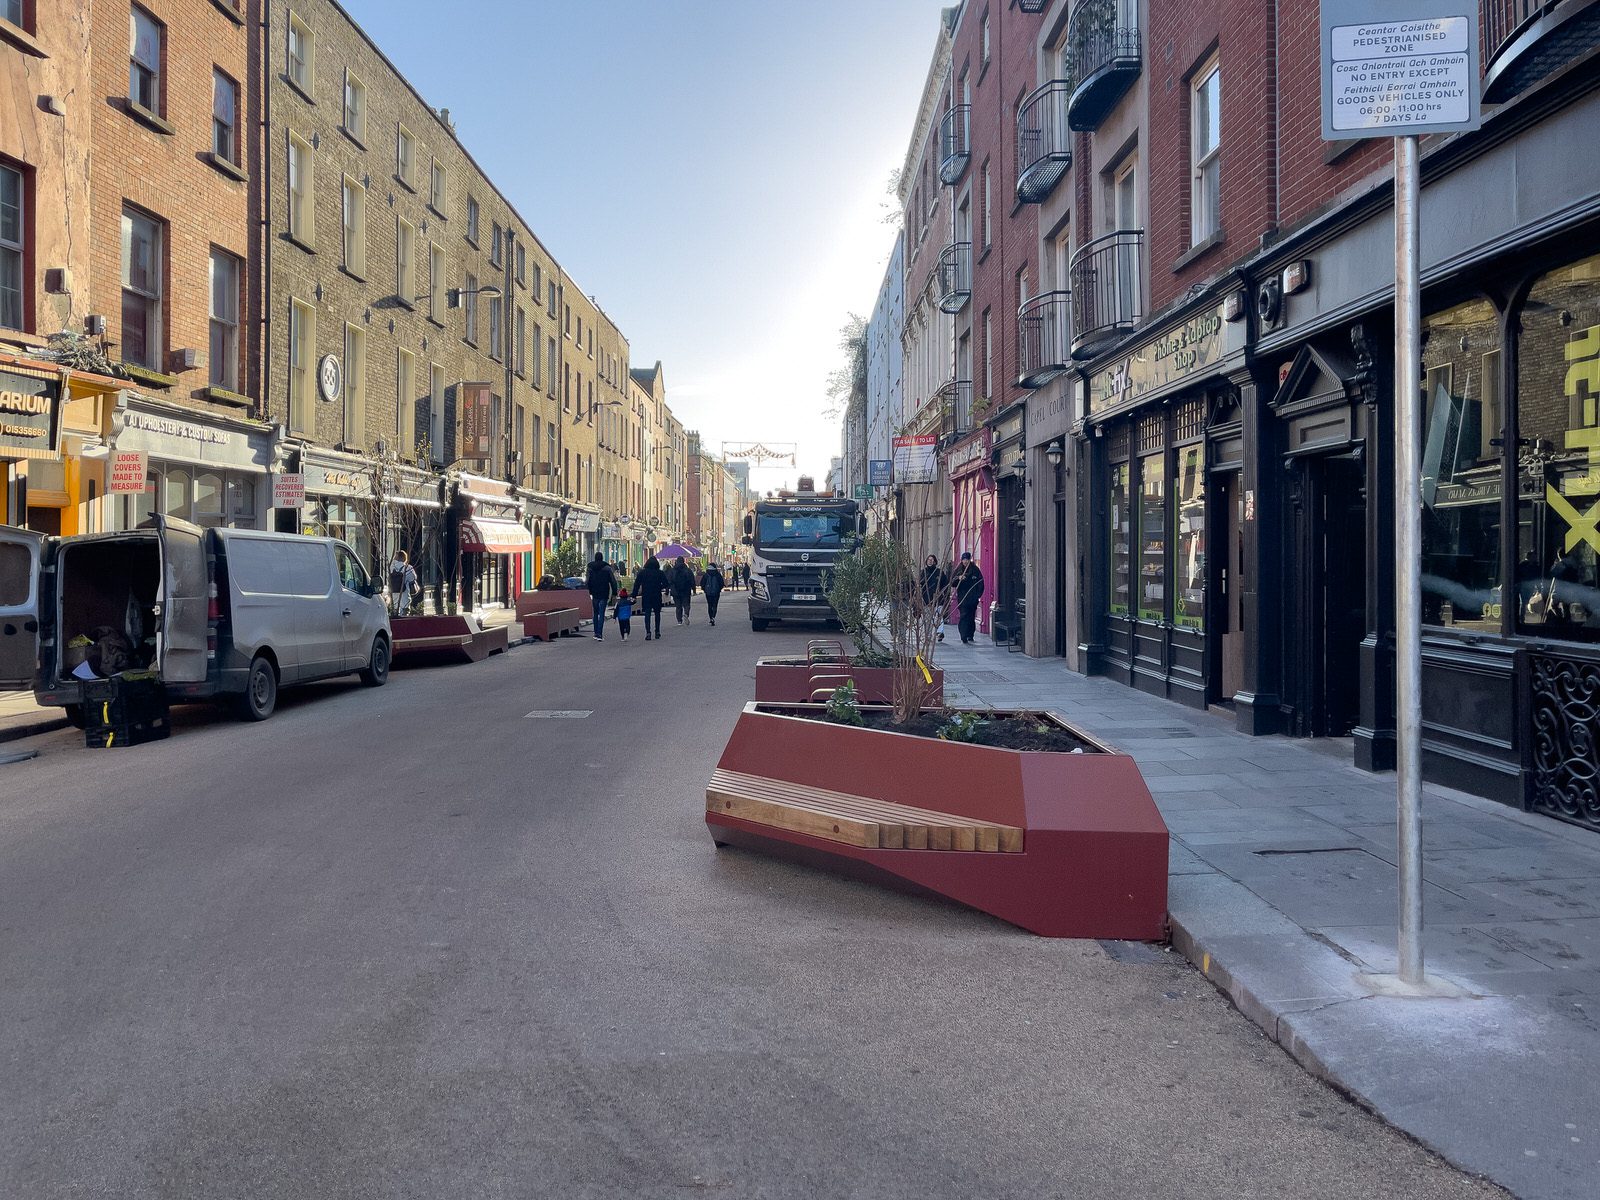 THE NEW STREET FURNITURE AND THE CHRISTMAS TREE [HAVE ARRIVED IN CAPEL STREET]-225853-1